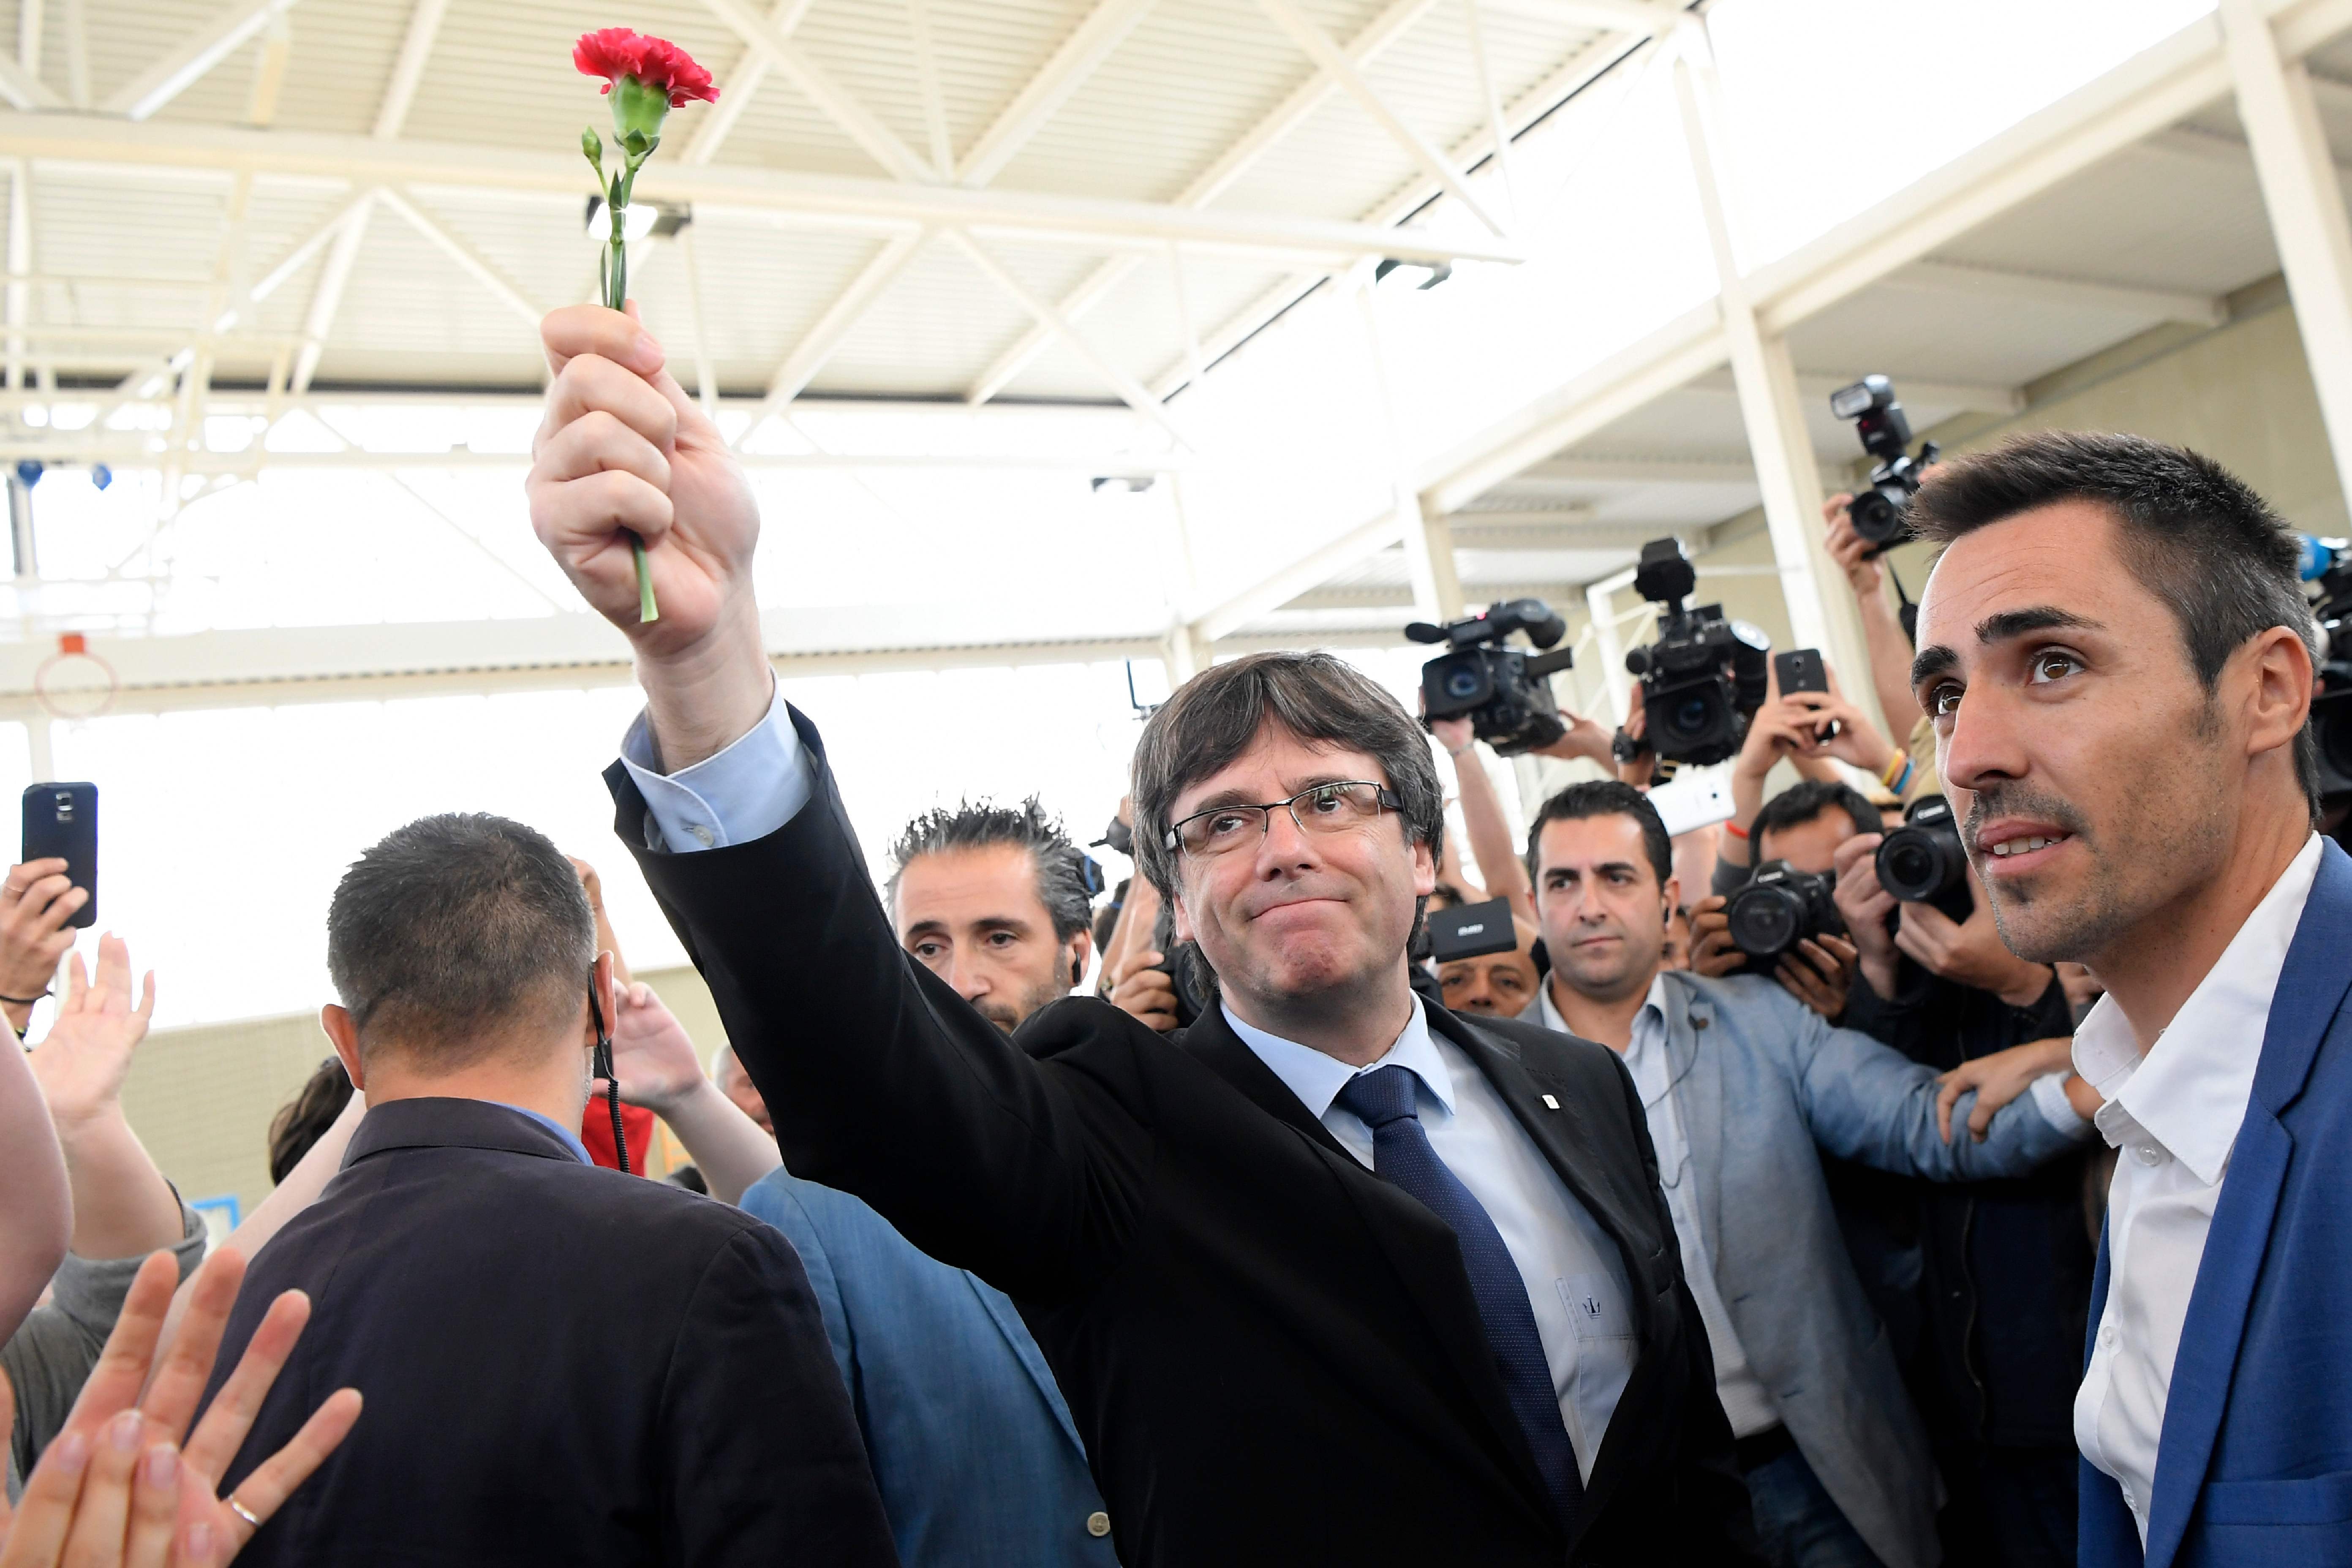 Catalan leader Carles Puigdemont holds a carnation in Sant Julia de Ramis on Sunday during the referendum on independence for Catalonia that was banned by Madrid. Photo: AFP